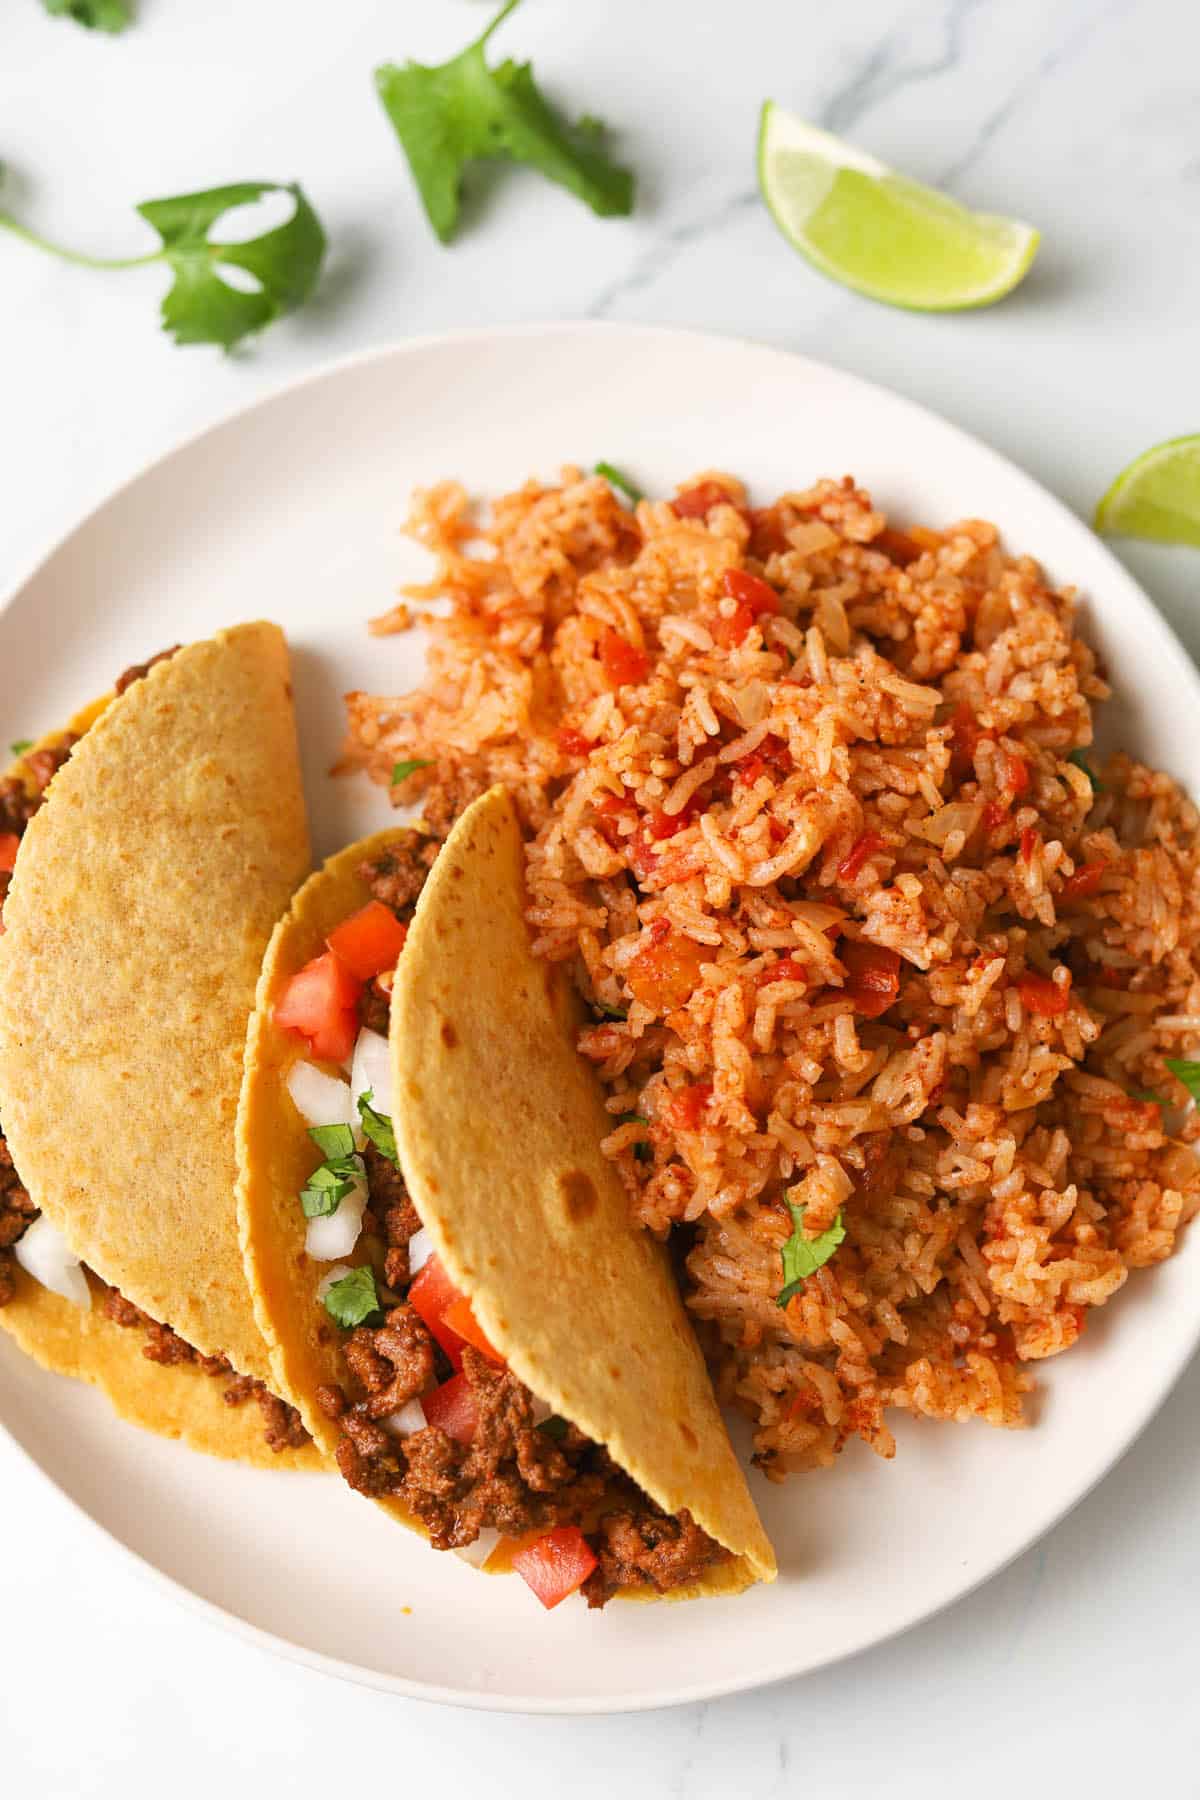 Spanish rice with tacos.